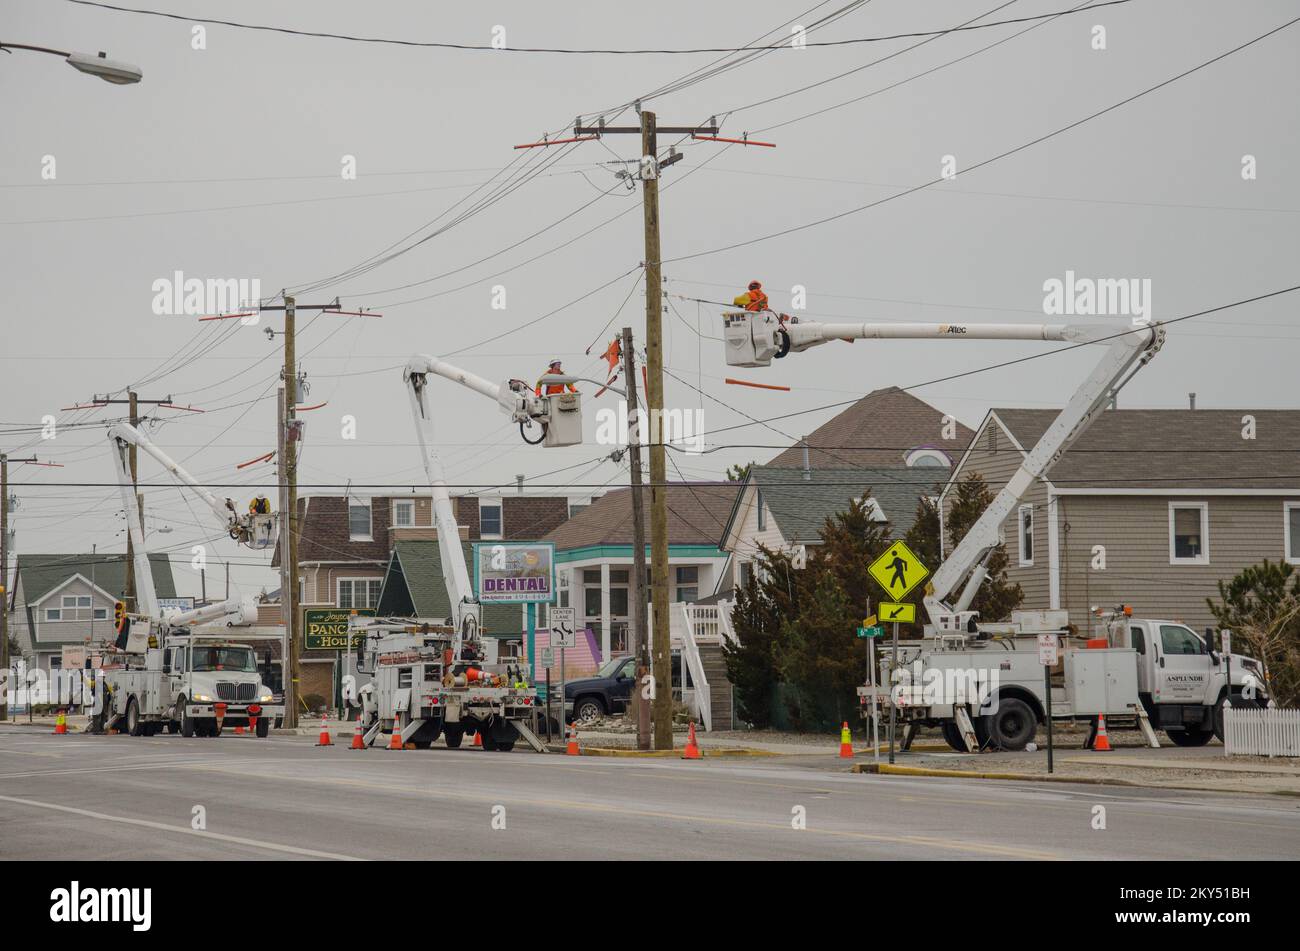 Utility Pole Replacement. New Jersey Hurricane Sandy. Photographs Relating to Disasters and Emergency Management Programs, Activities, and Officials Stock Photo